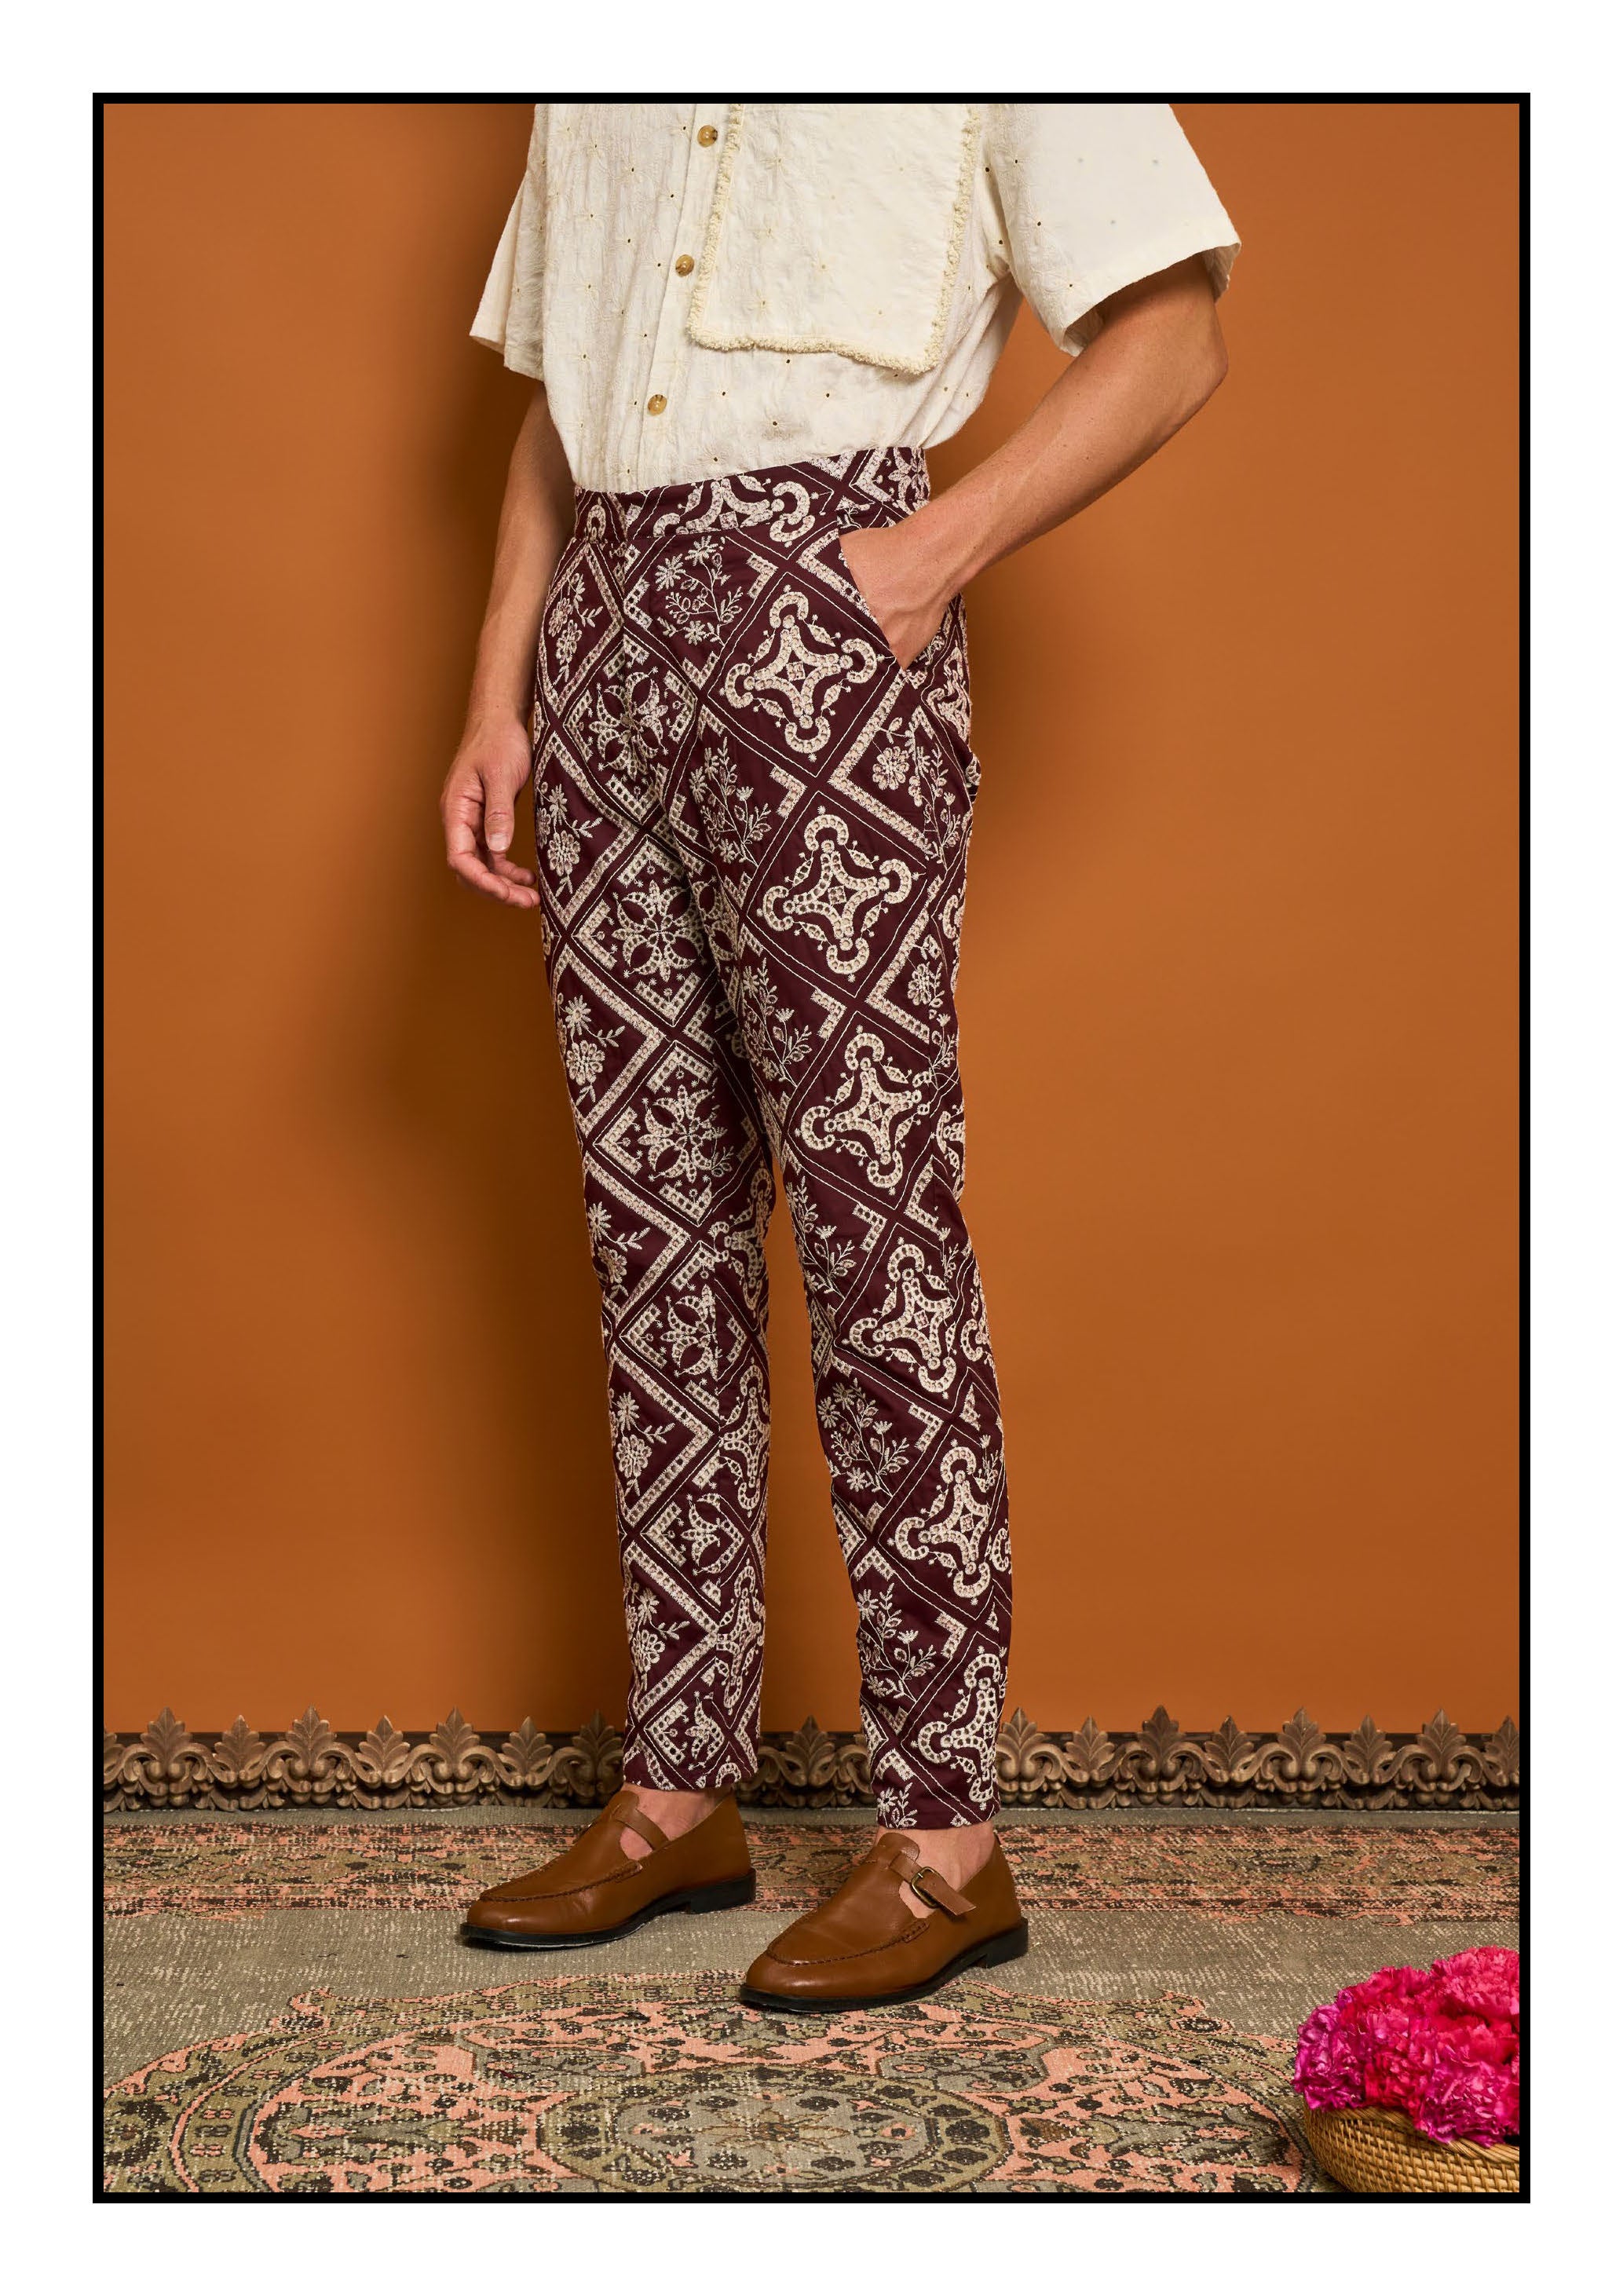 No:28SM02TRM028BRG | Name:Garnet Embroidered Tailored Trousers | Color:Burgundy【SISTER JANE_シスタージェーン】